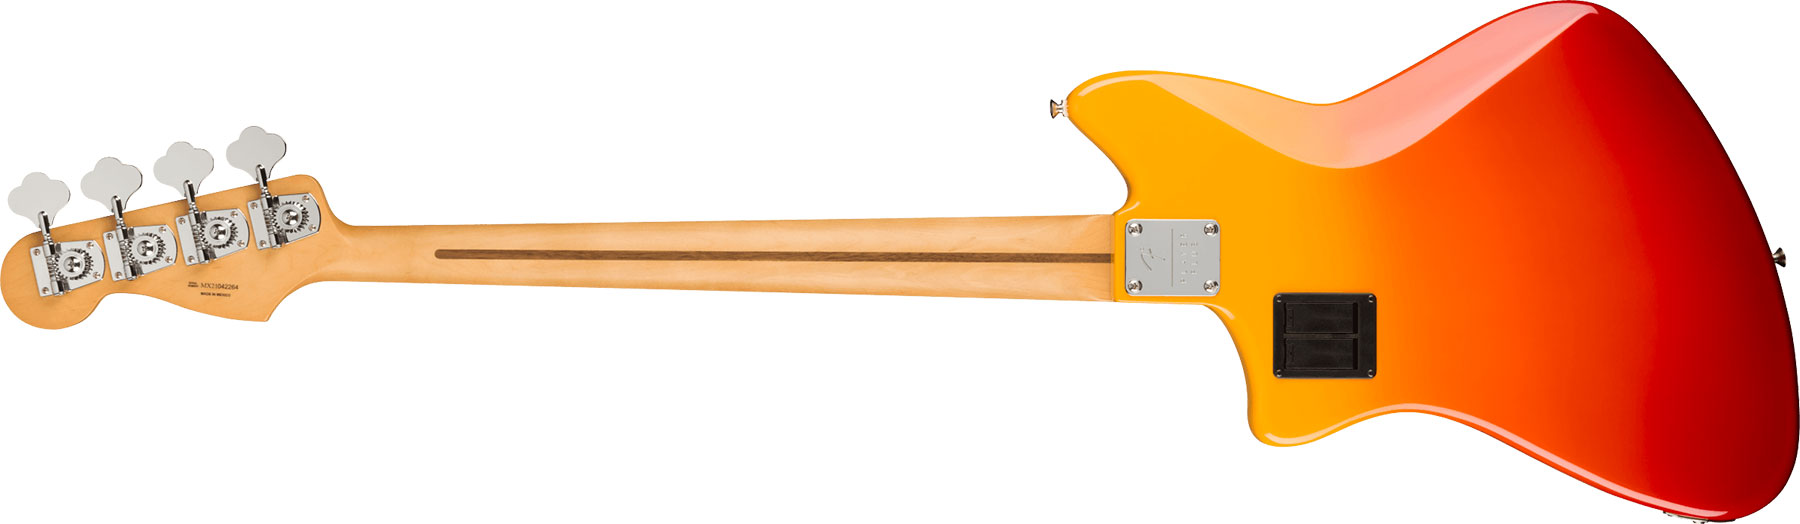 Fender Meteora Bass Active Player Plus Mex Pf - Tequila Sunrise - Solidbody E-bass - Variation 1